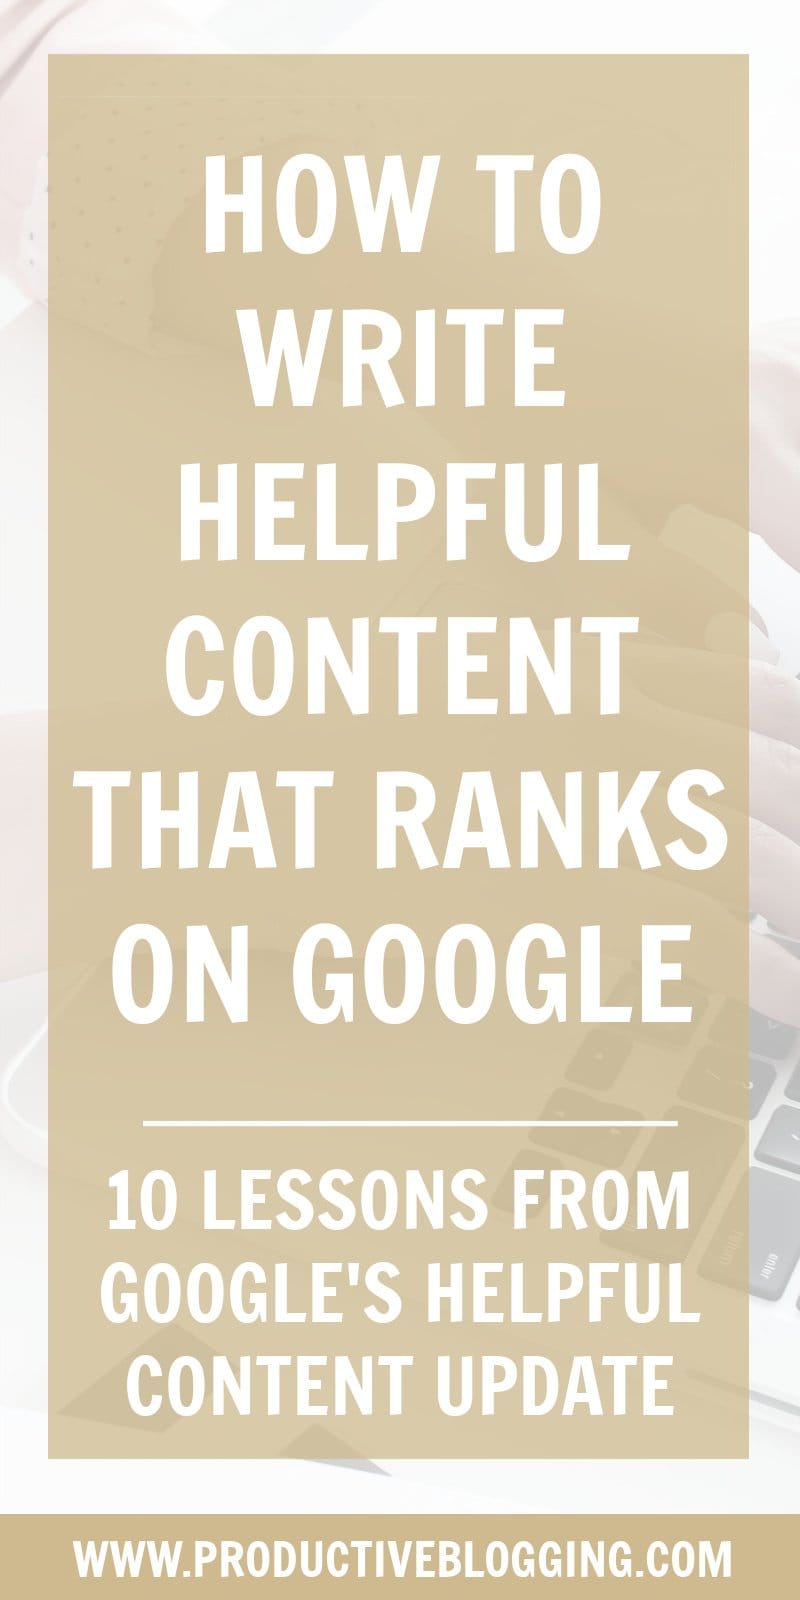 Google’s Helpful Content Update did not have the enormous impact SEOs predicted… does that mean we should ignore it? Not at all! There’s a lot we can learn from this update about how to write content that will rank on Google in the future. #helpfulcontentupdate #helpfulcontent #googlerankingfactors #googleSEO #SEO #SEOtips #SEOhacks #searchengineoptimization #SEOforbloggers #bloggerSEO #blogSEO #growyourblog #bloggrowth #bloggingtips #blogtips #blog #blogging #bloggers #productiveblogging